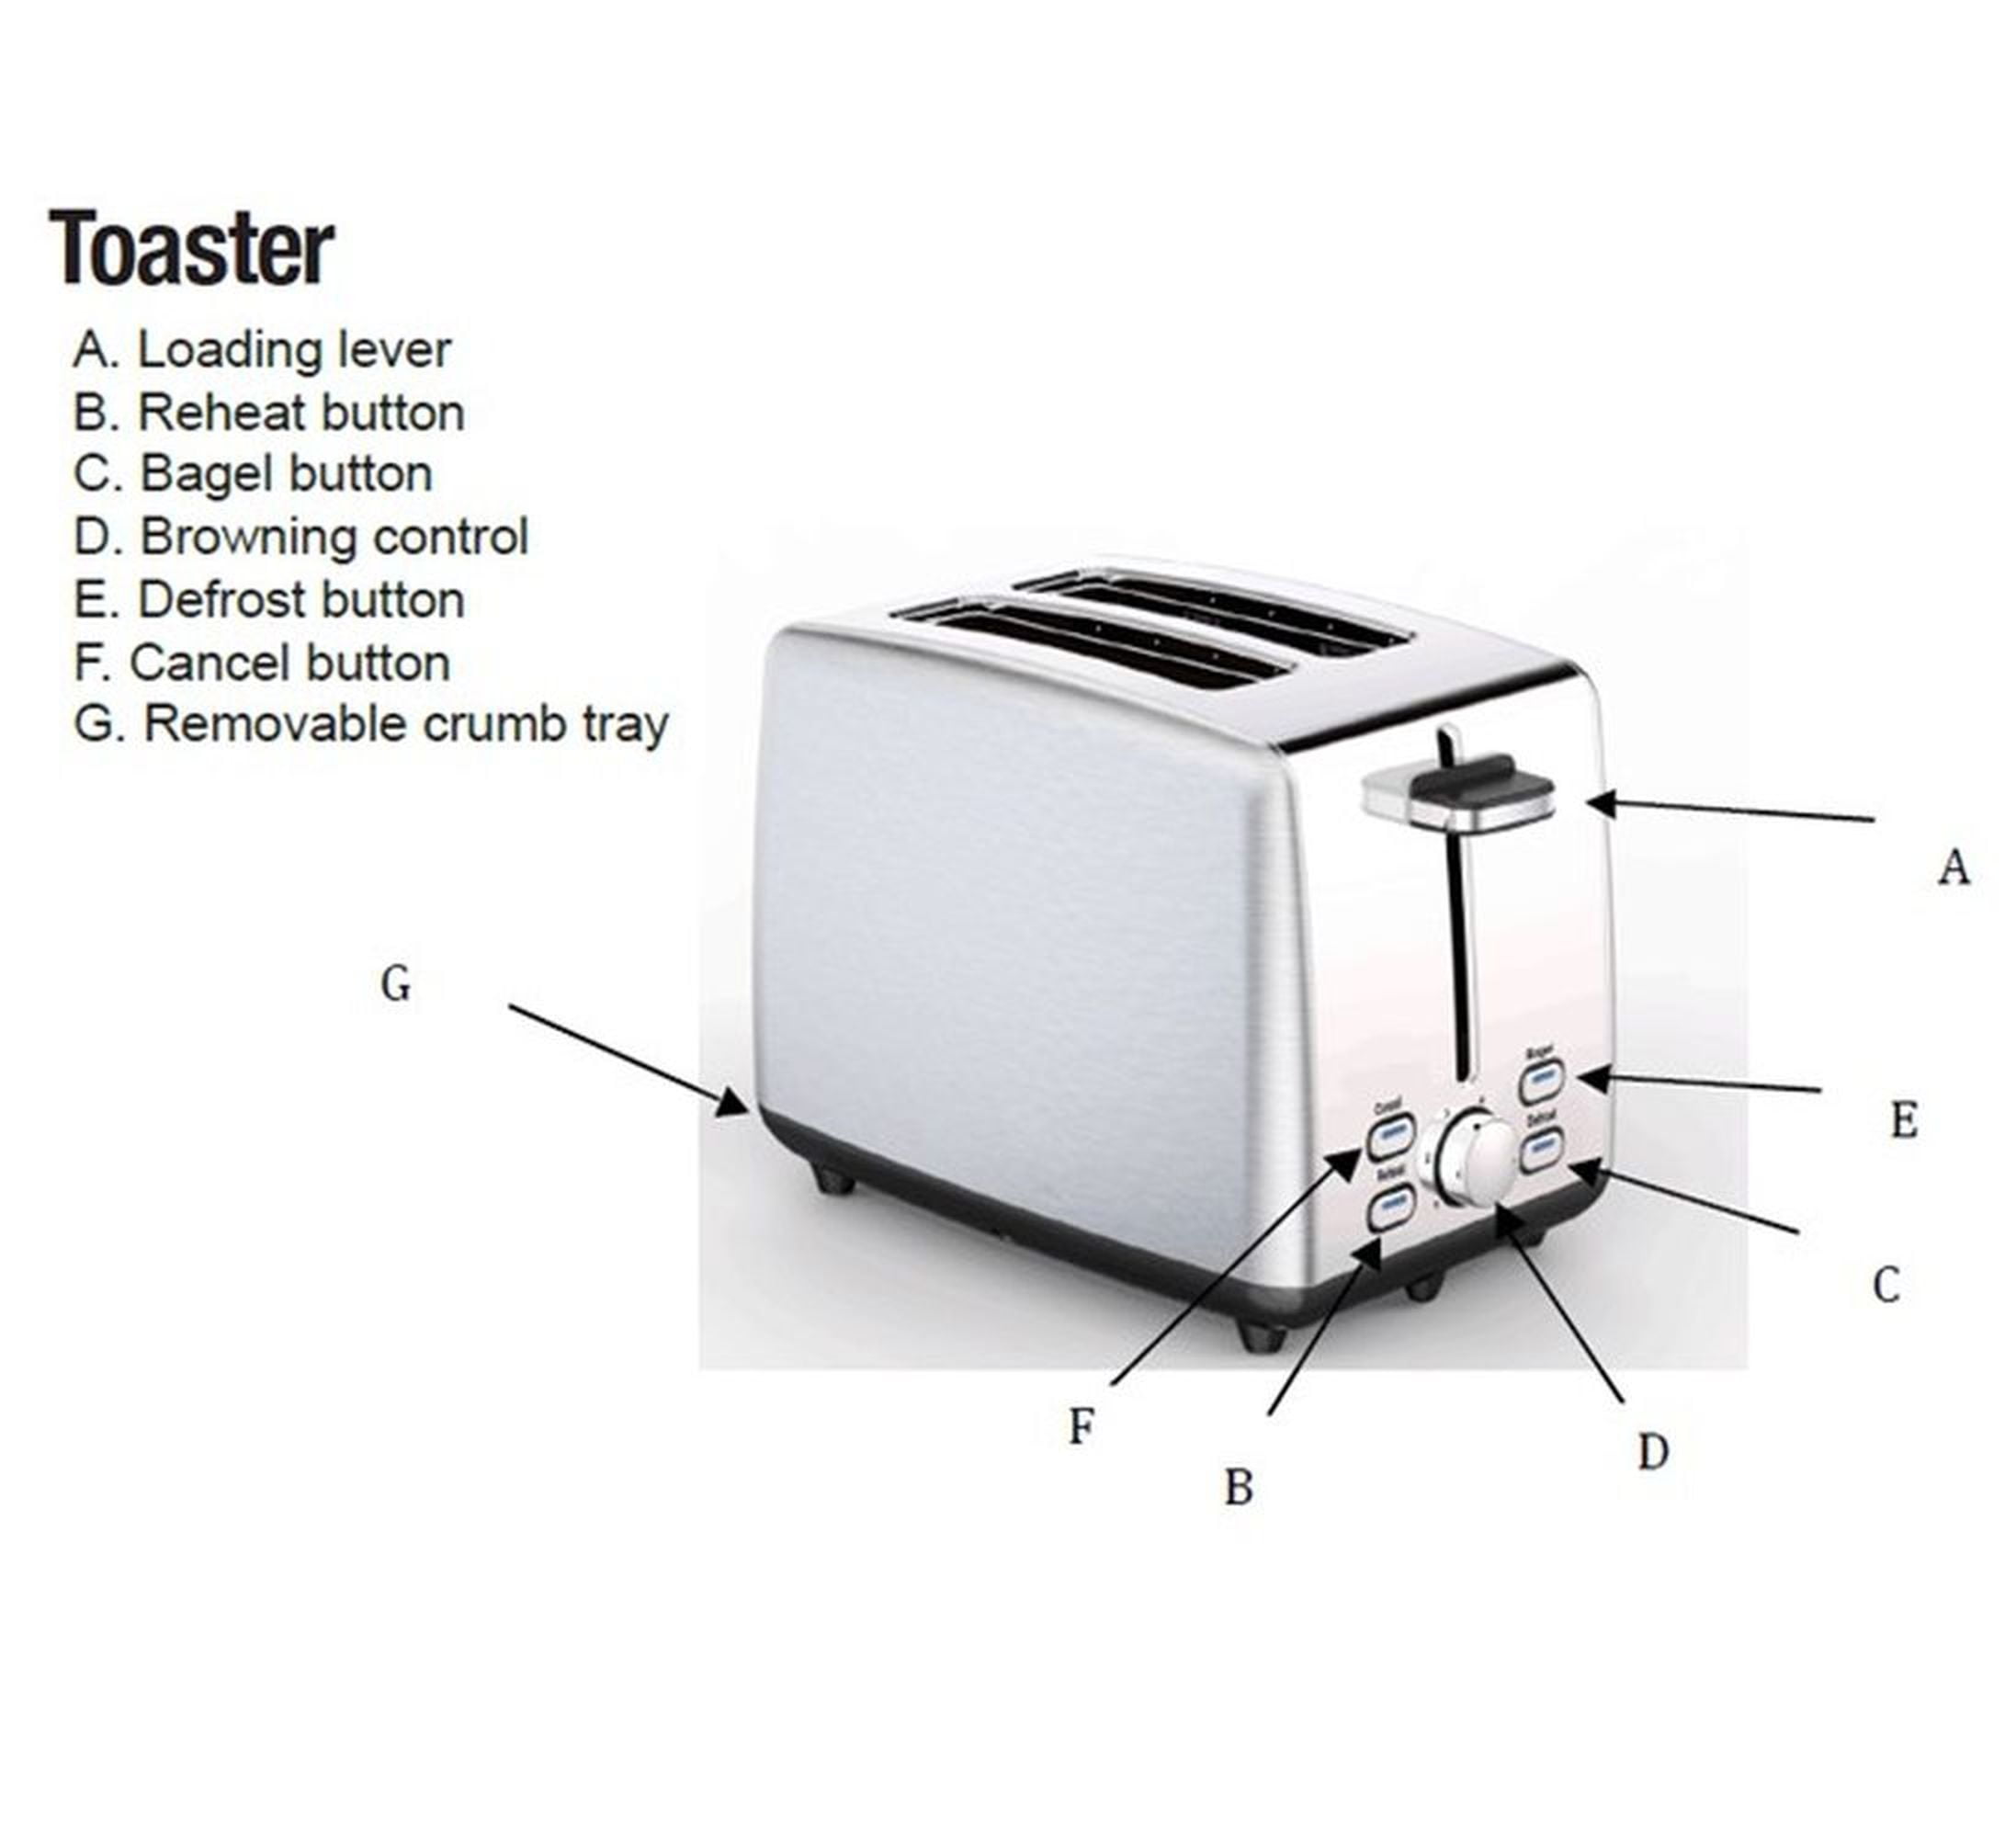 Dualit 4 slice toaster - 20 years service so far, bought it as they did and  still do sell spare parts but it has never needed anything : r/BuyItForLife